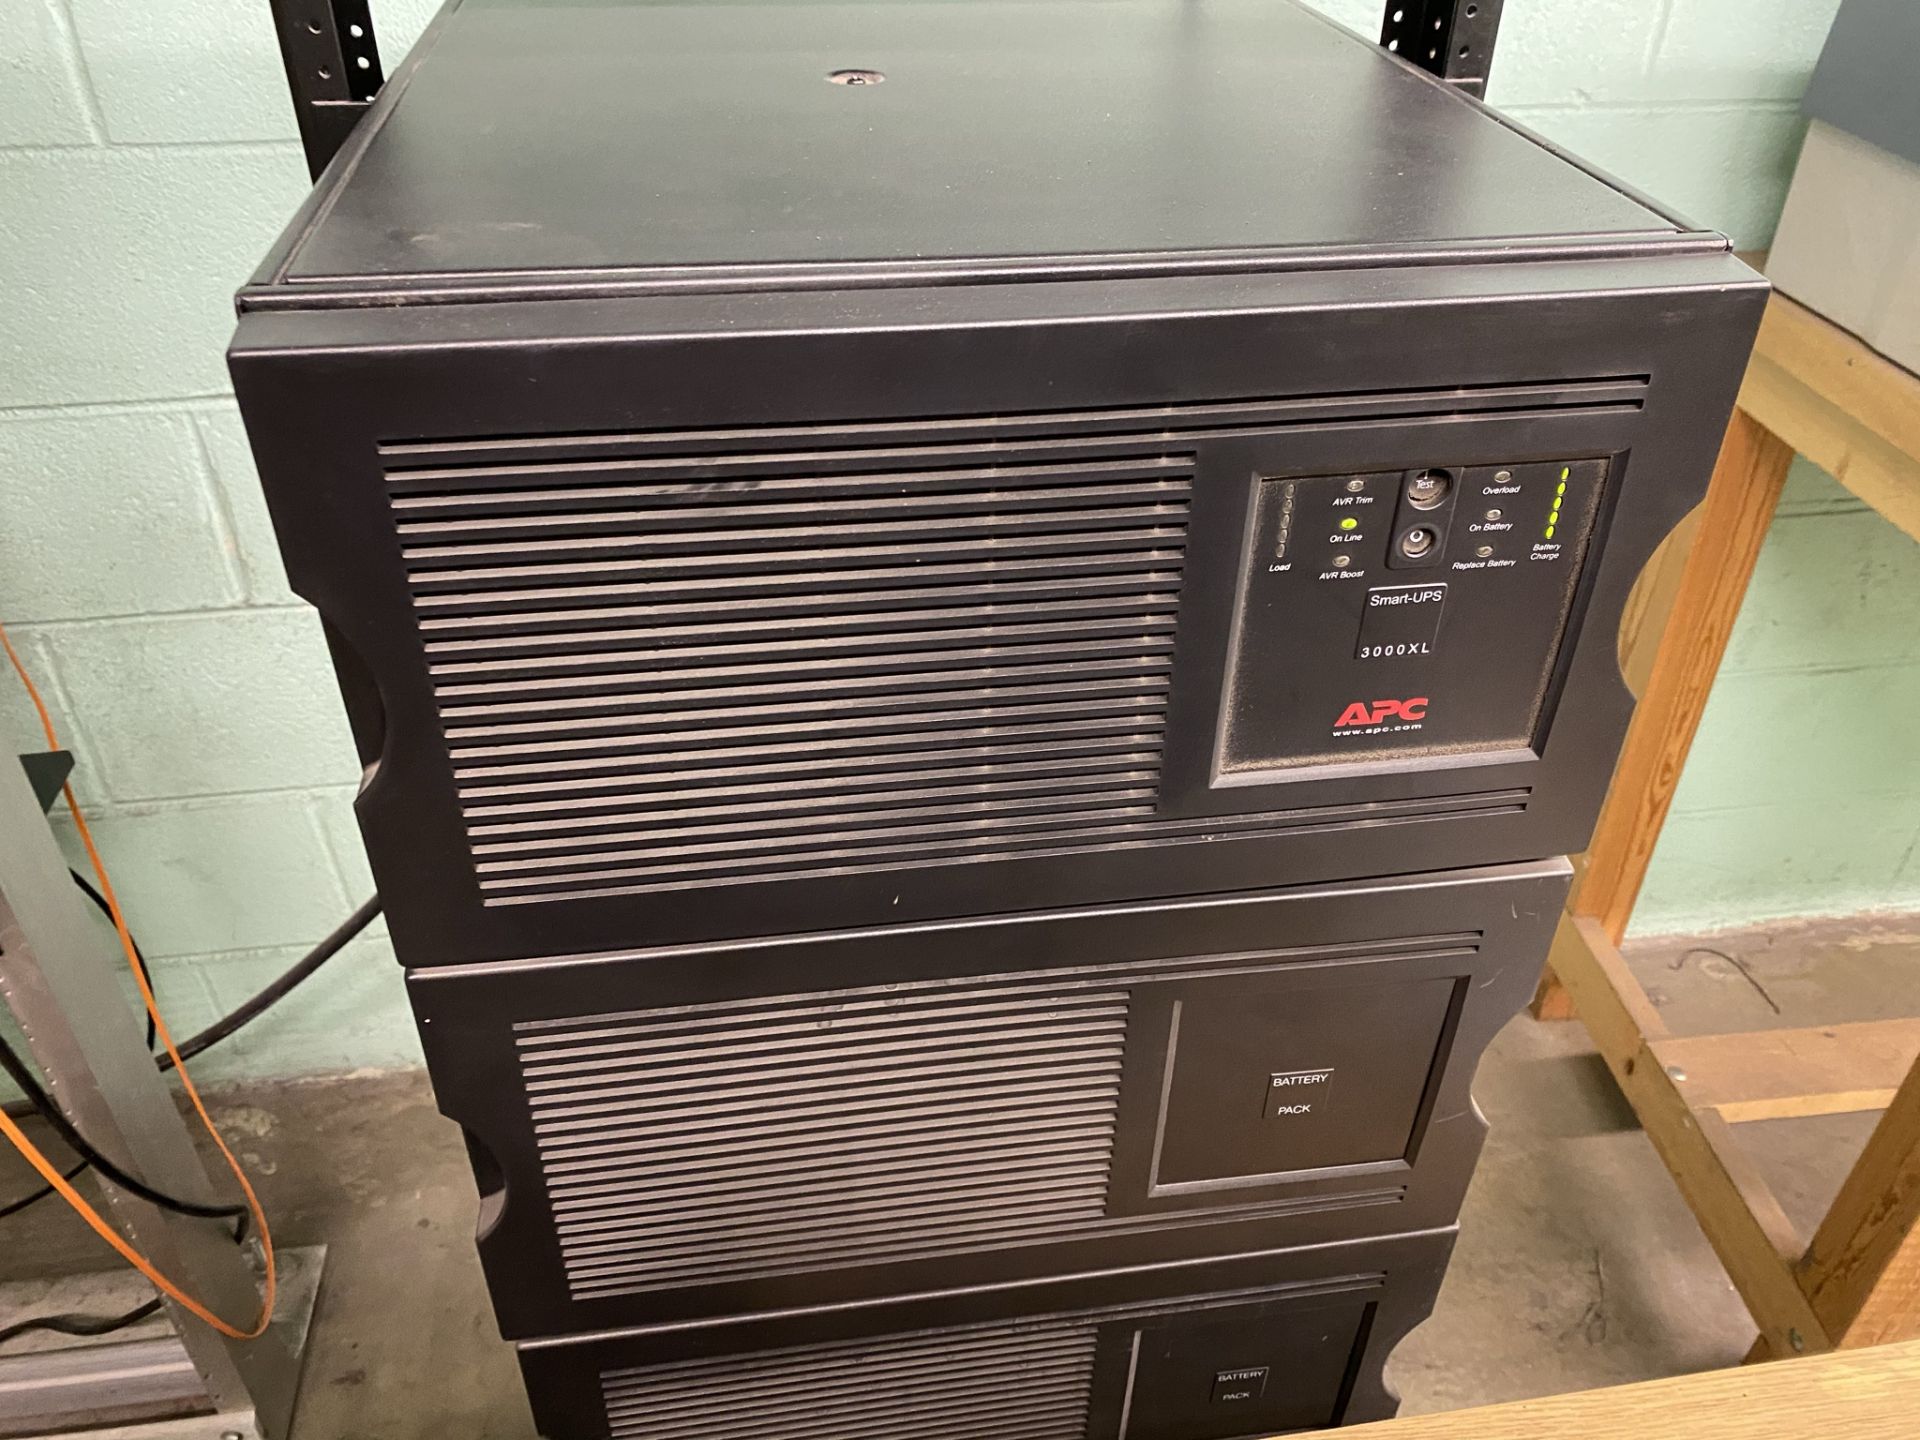 APC Smart-UPS 3000XL Uninterruptable Power Supply Stack with Rack [Loc: Church Hill, TN] - Image 2 of 4